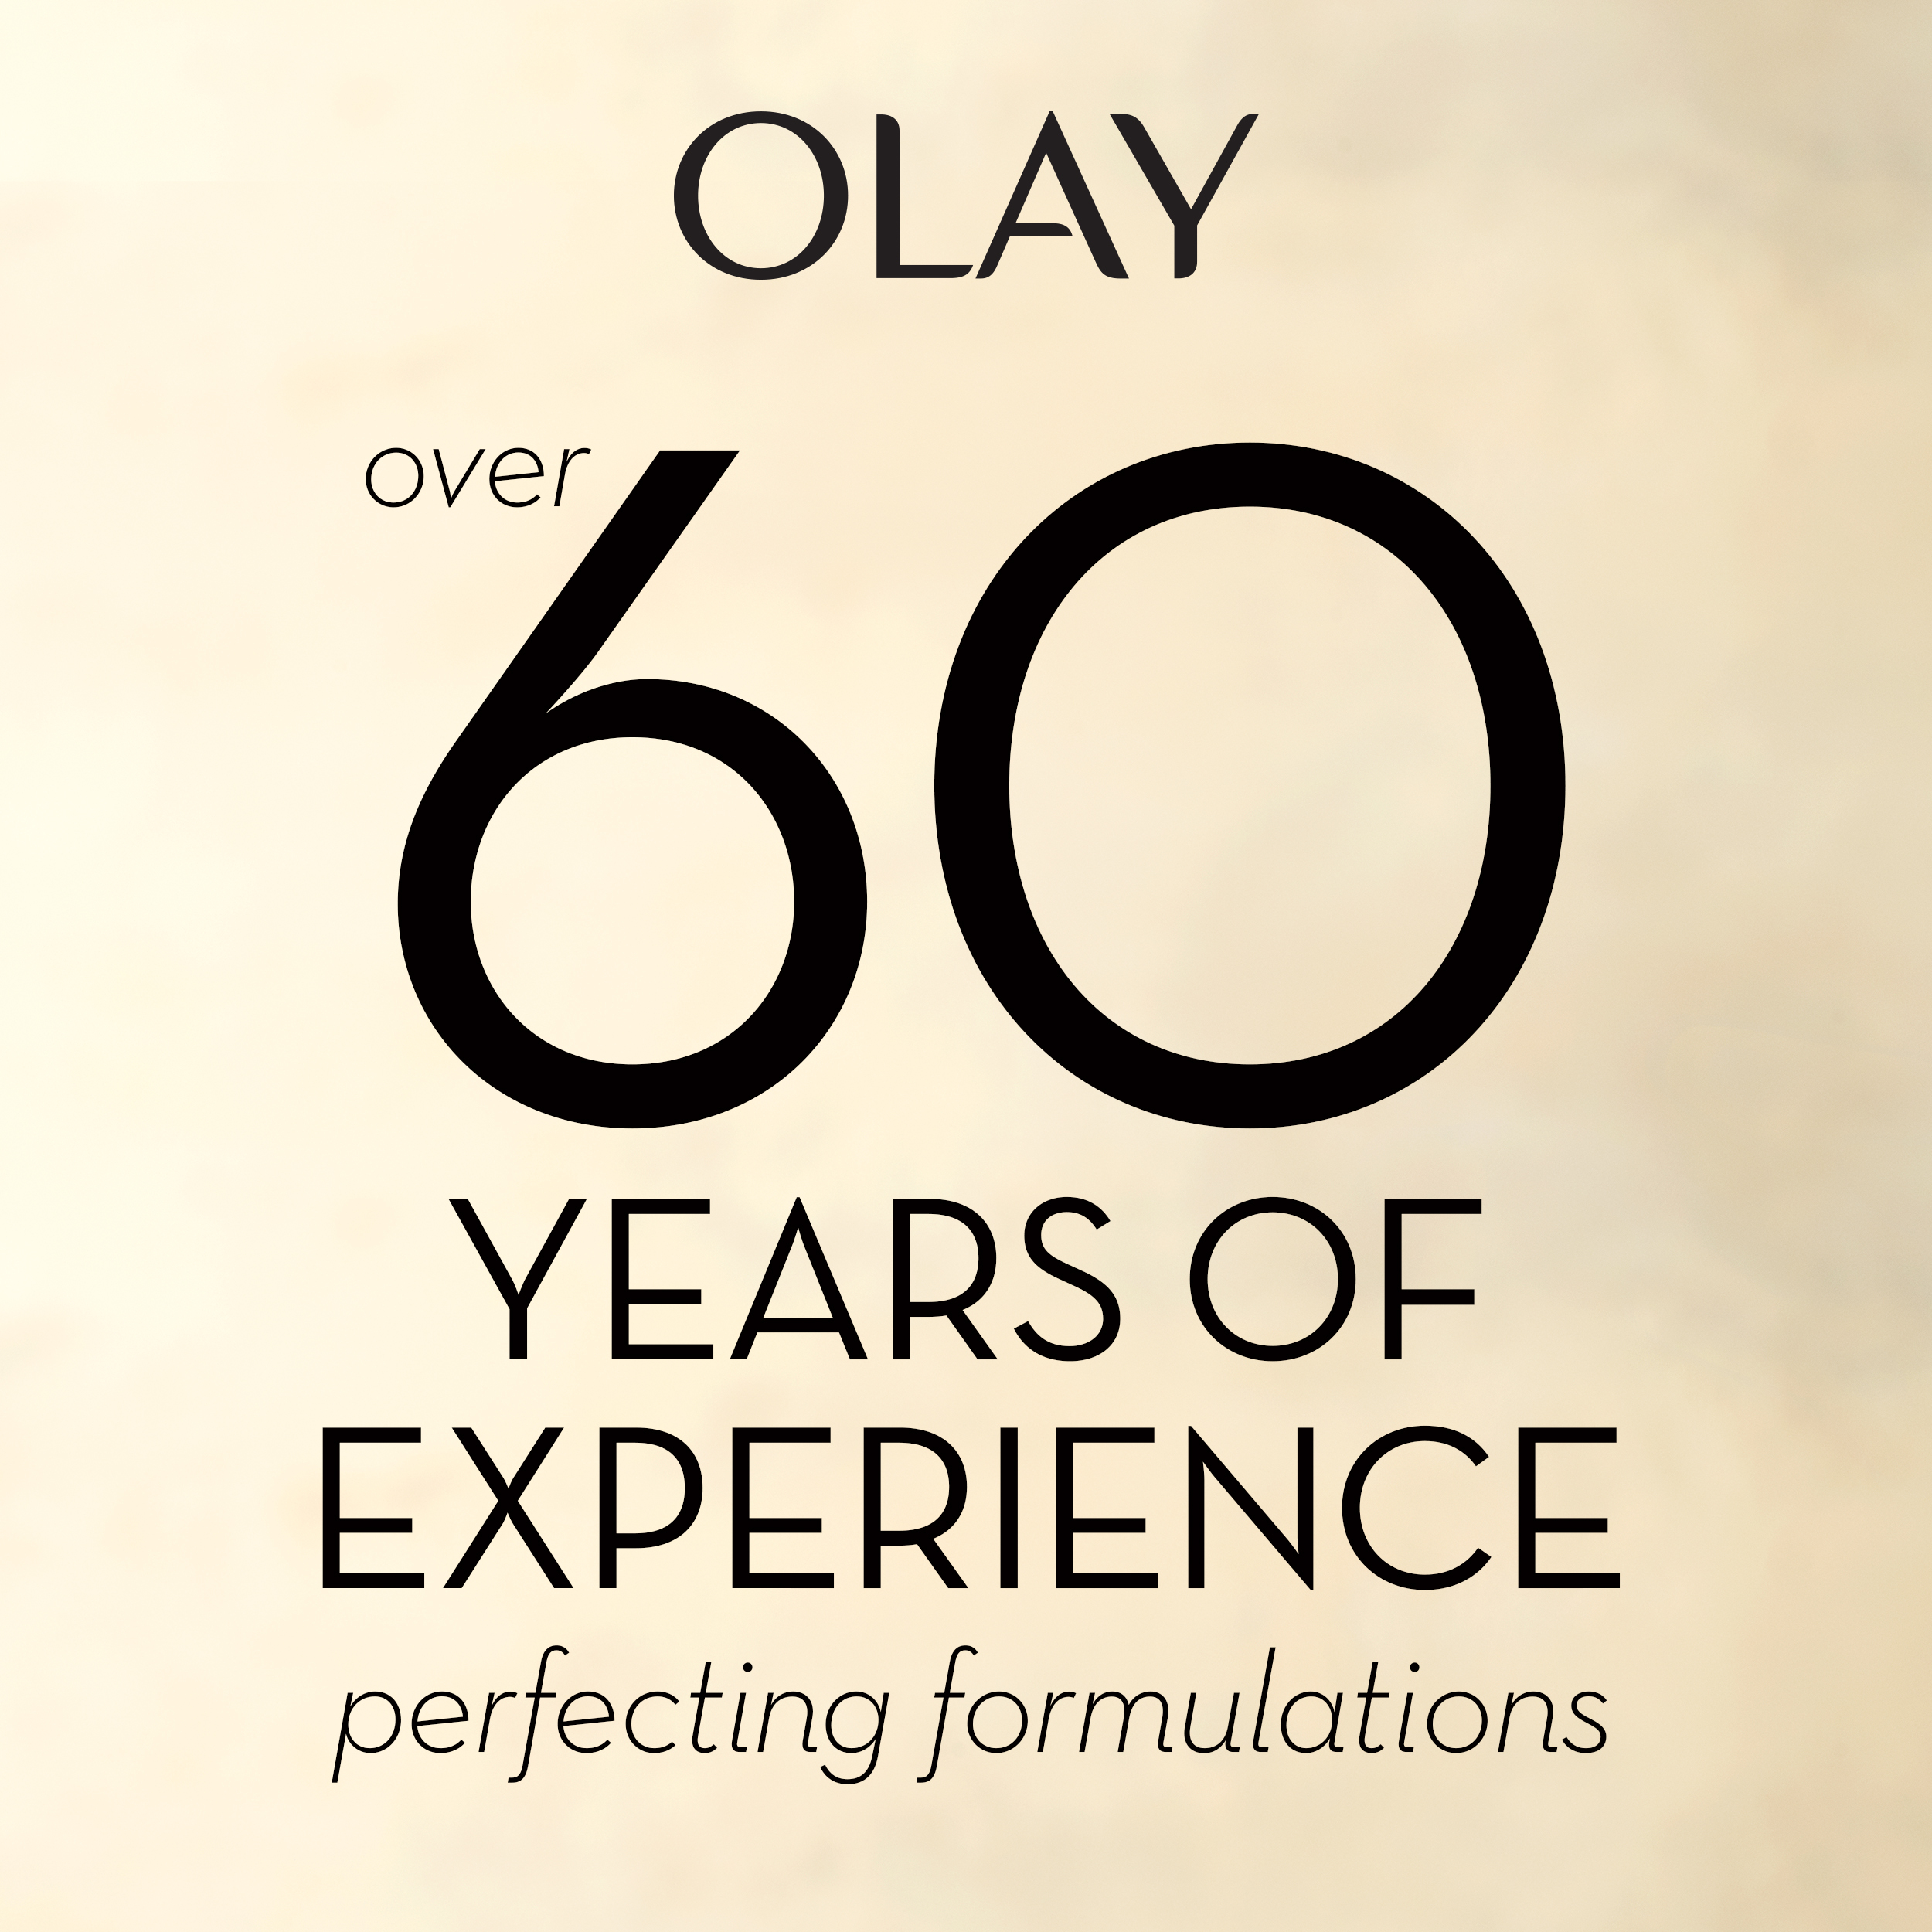 Olay Fresh Outlast Body Wash with Notes of Cucumber and Aloe, 22 fl oz - image 5 of 11